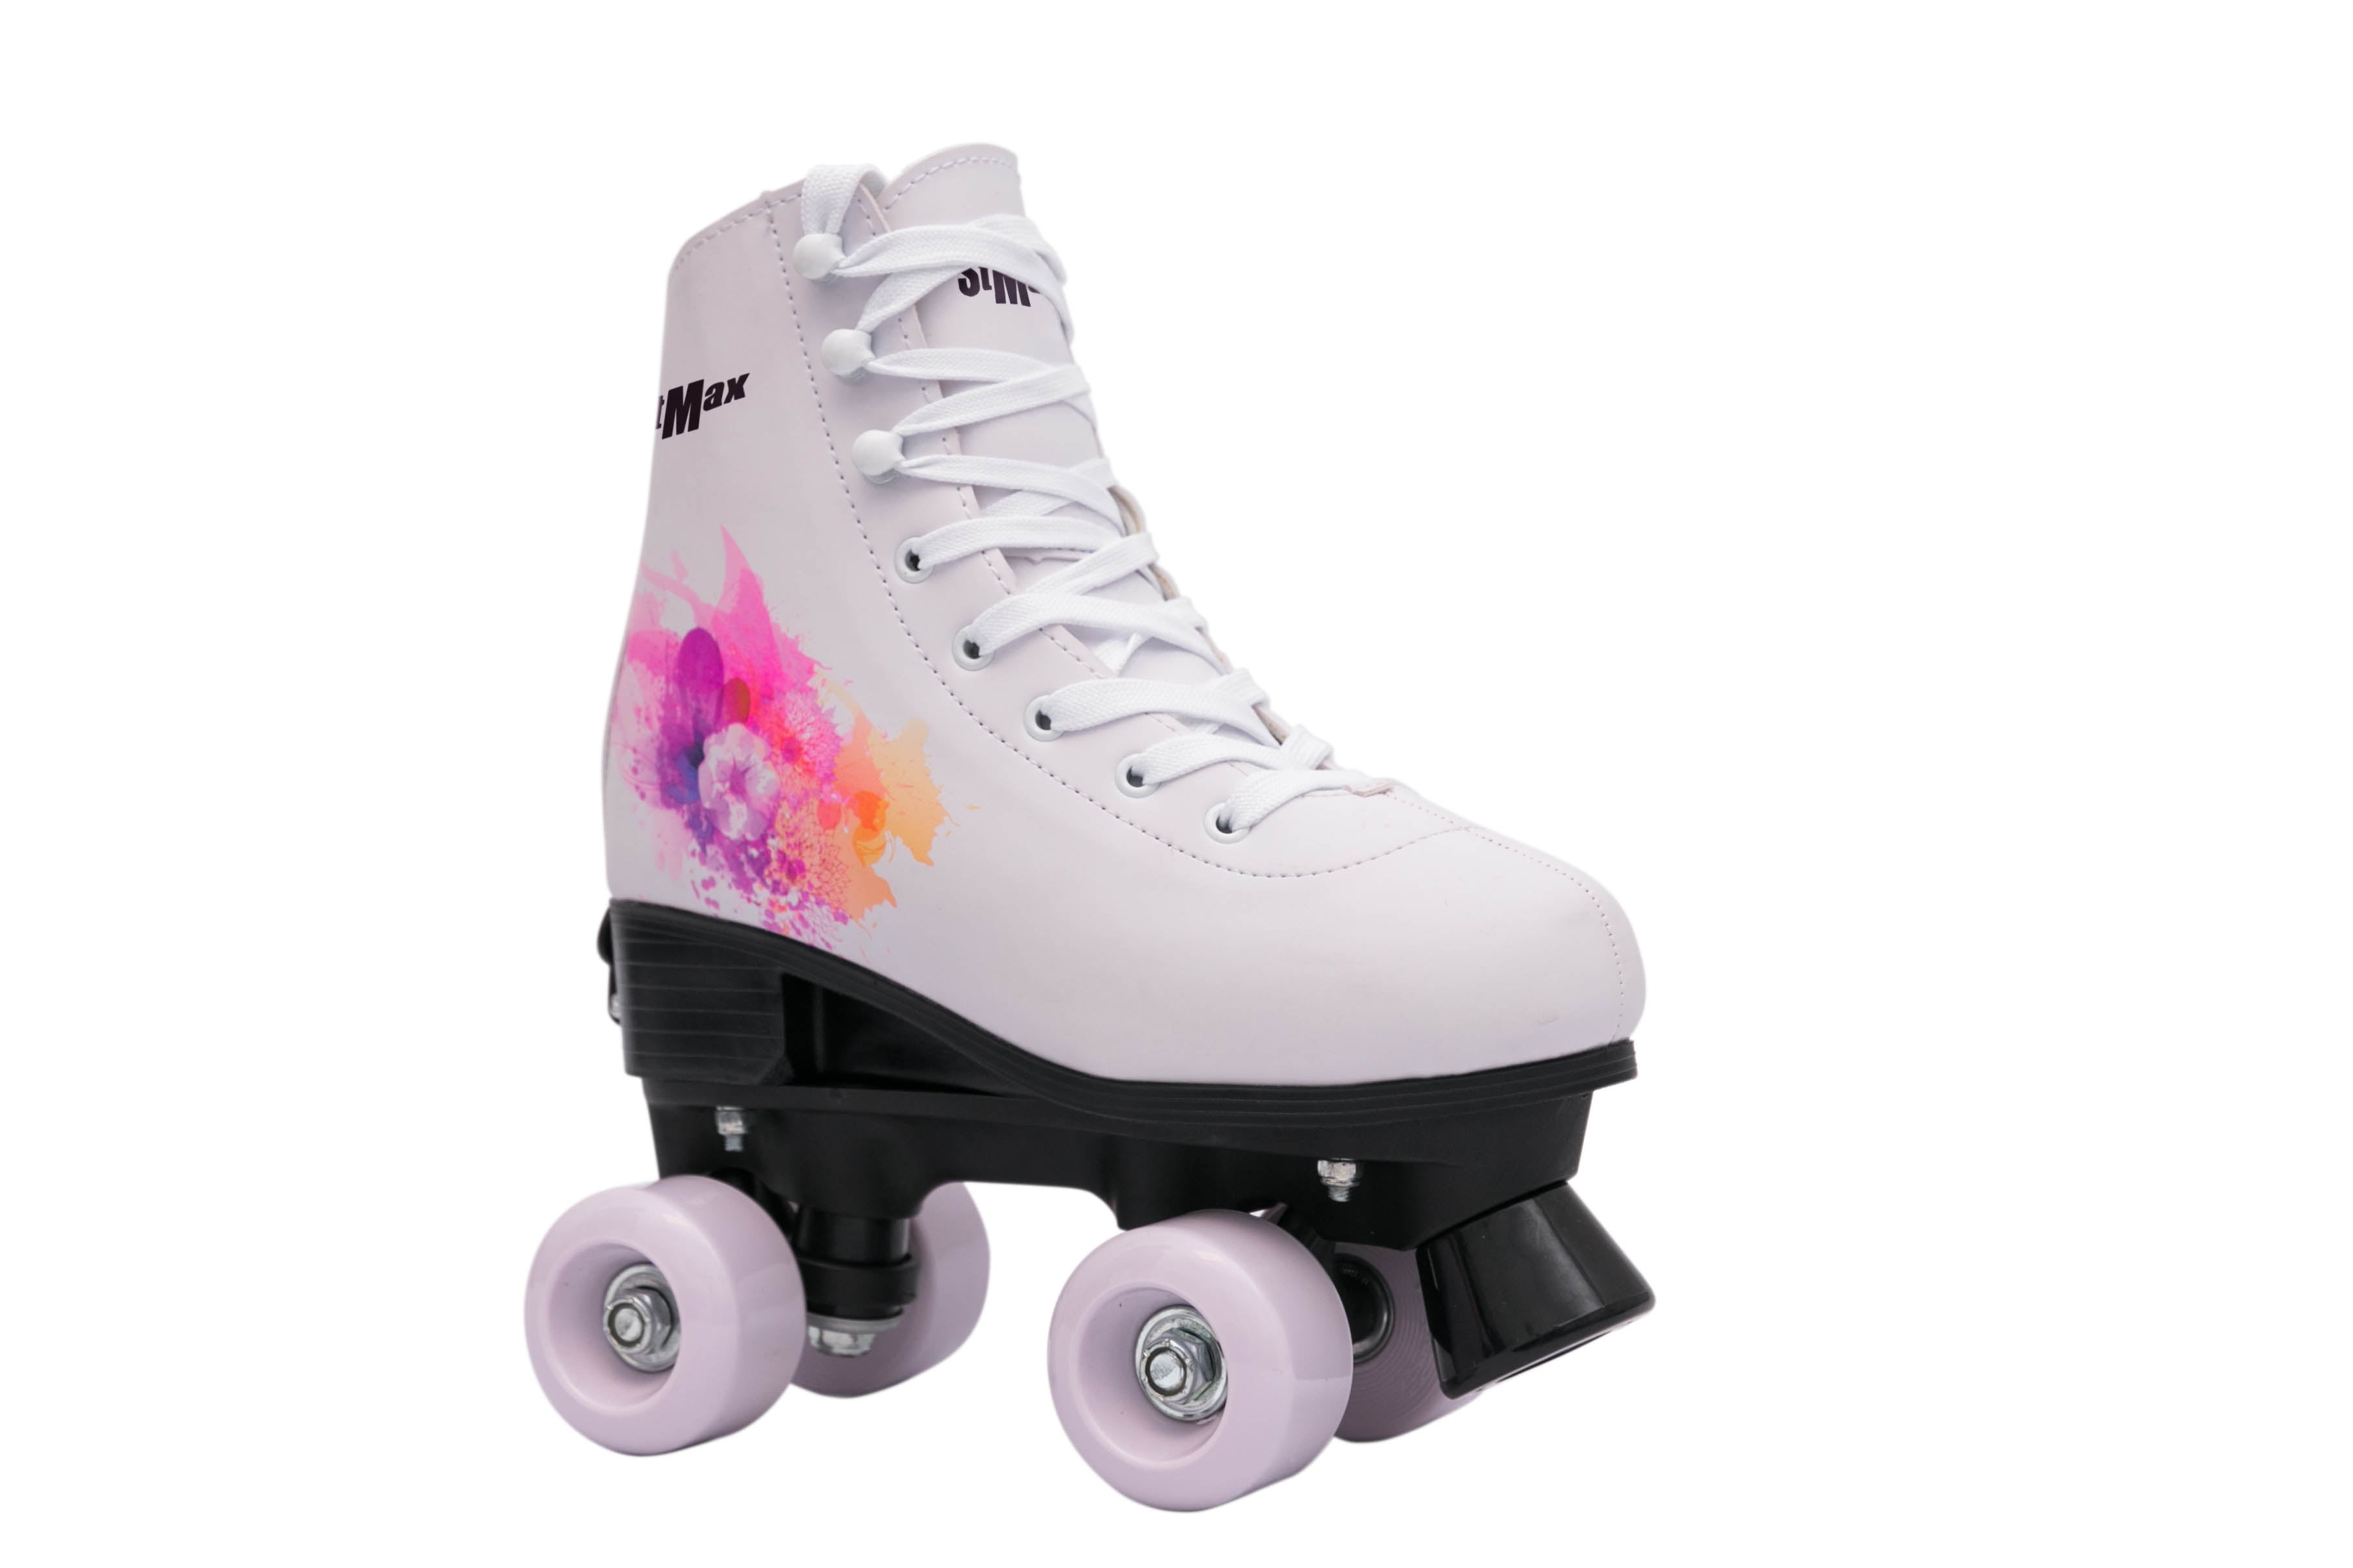 Stmax Quad Rollerskates for Women White and Purple size 6.5 Adult 4-Wheels 